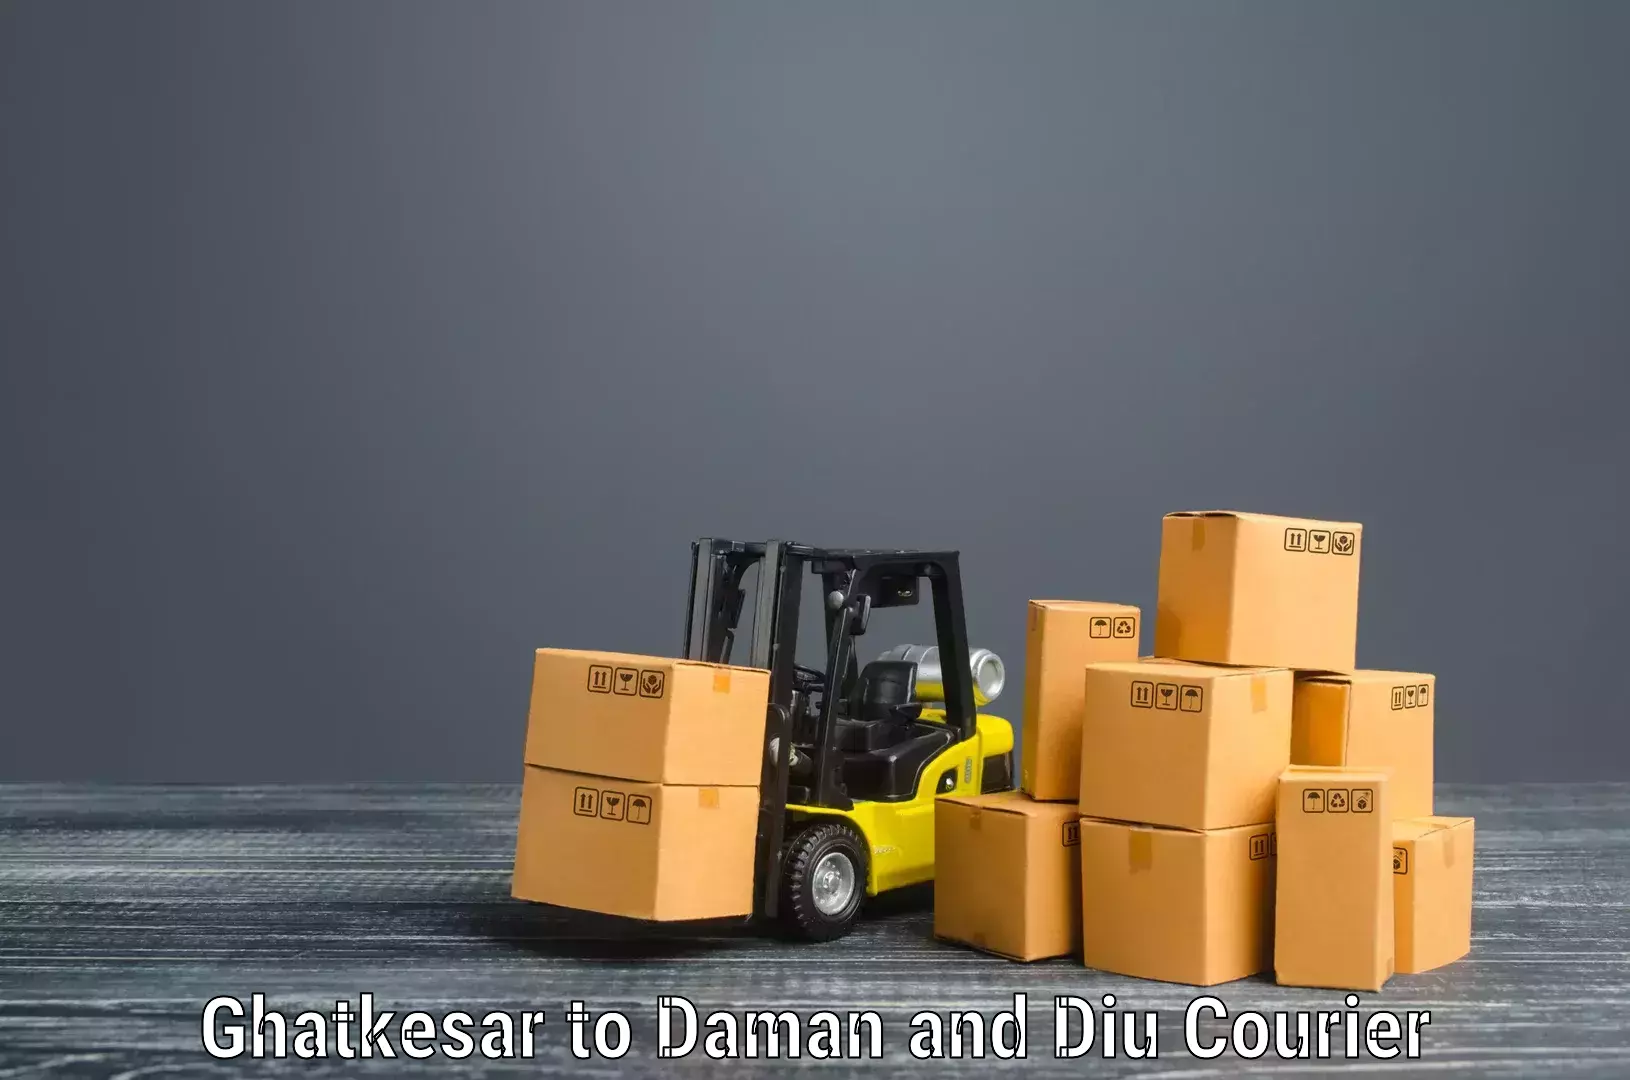 Professional movers and packers Ghatkesar to Diu